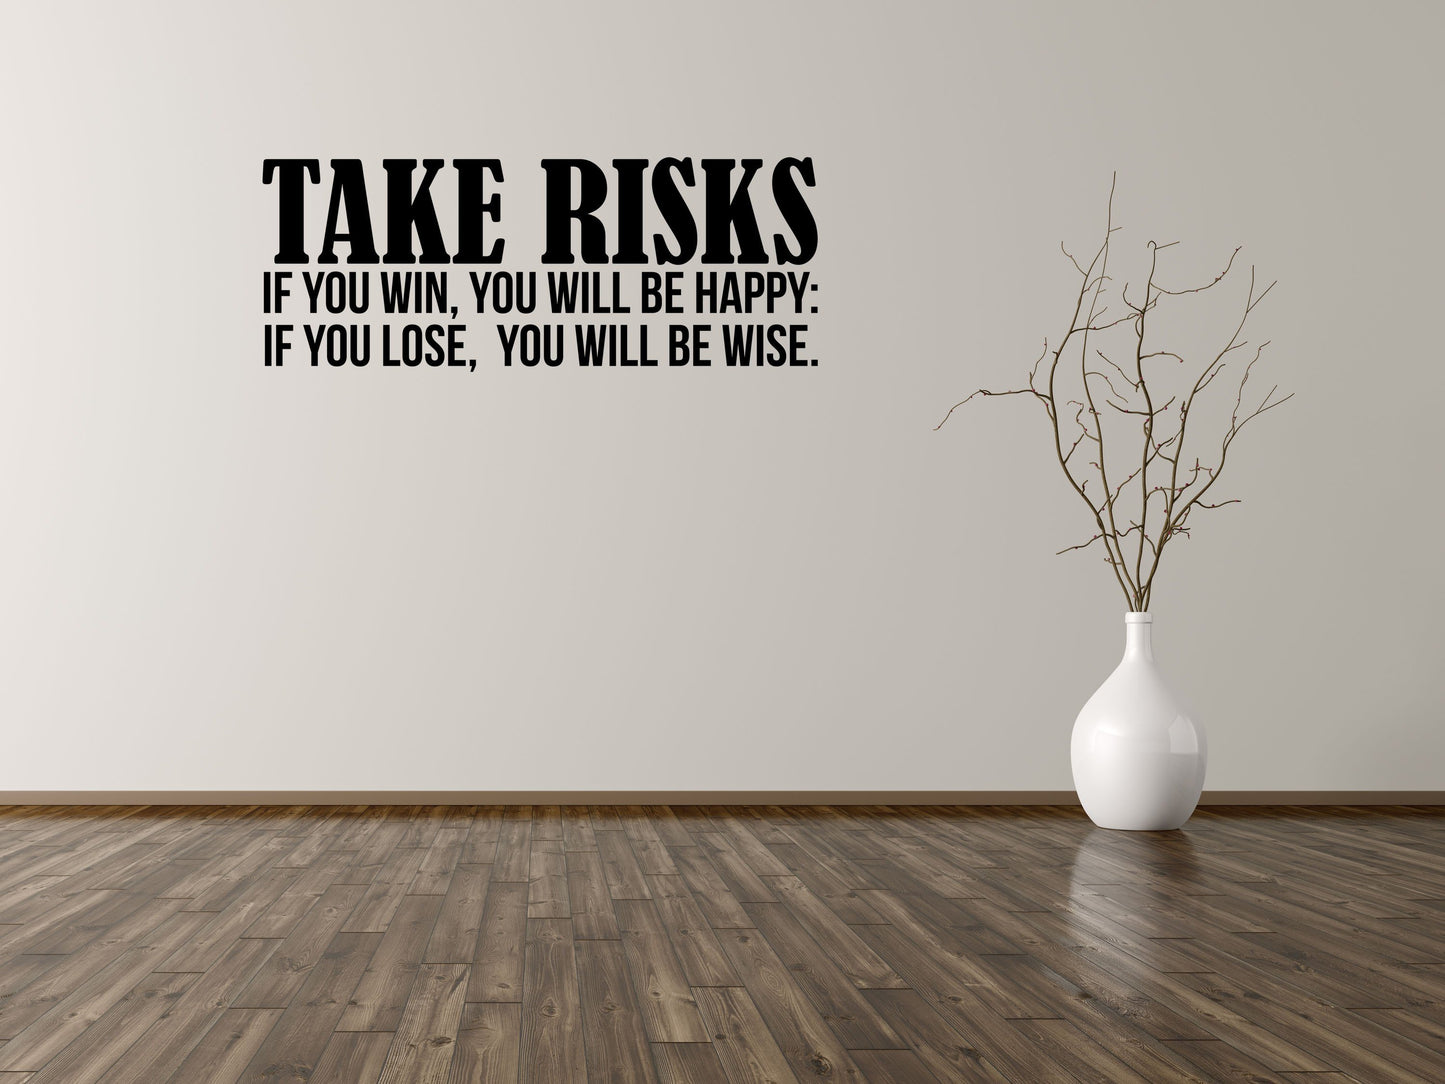 Take Risks Office Wall Quote Sticker- Inspirational Wall Decals Vinyl Wall Decal Inspirational Wall Signs 